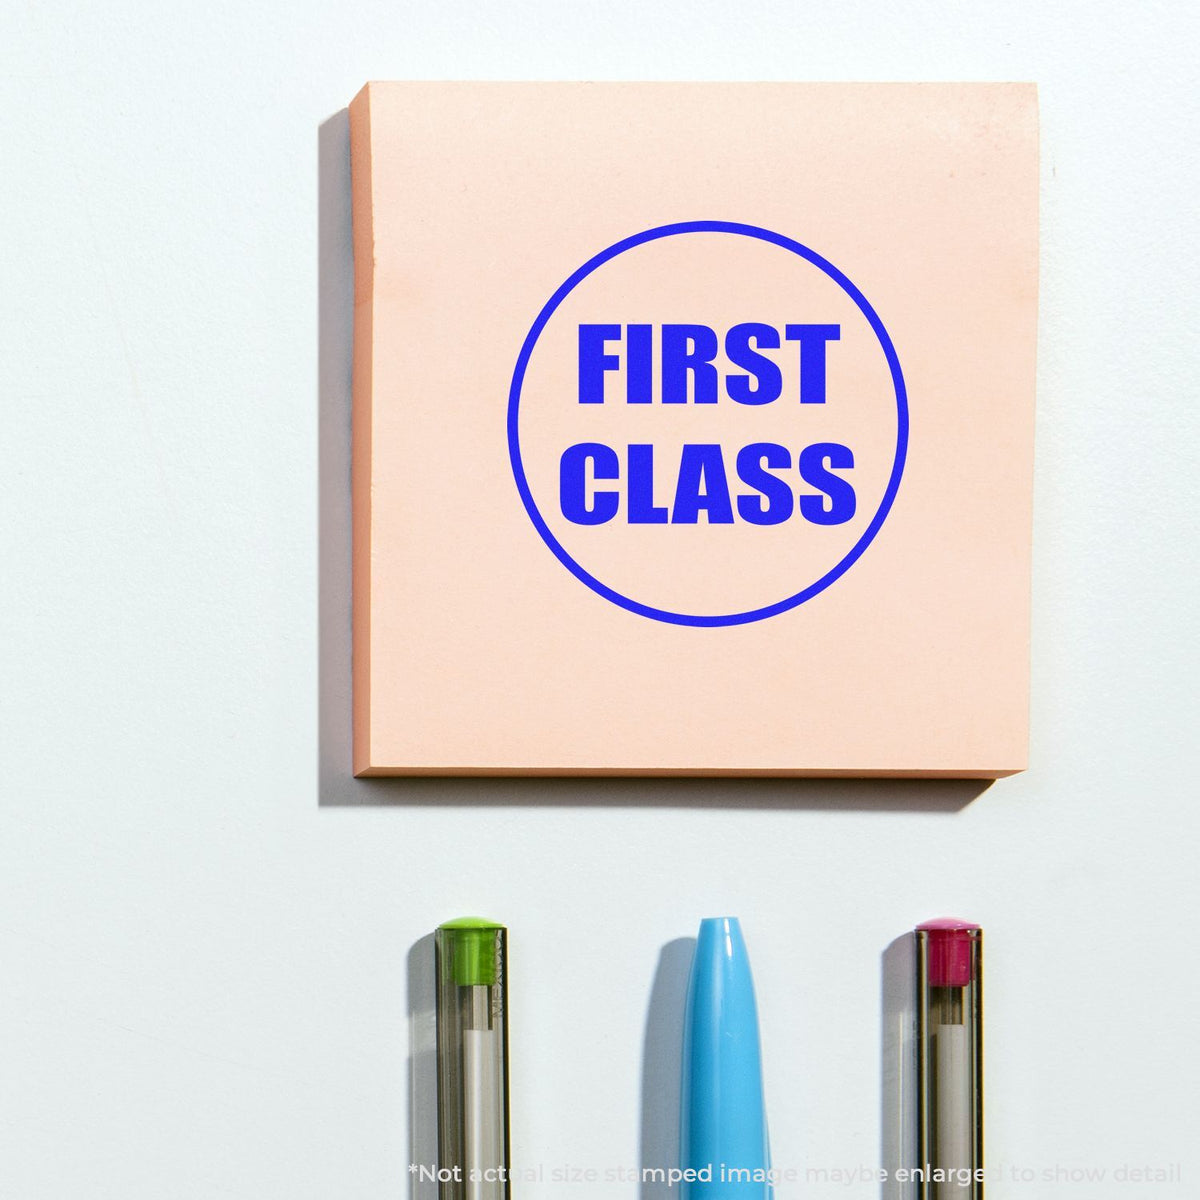 Self-Inking Round First Class Stamp In Use Photo